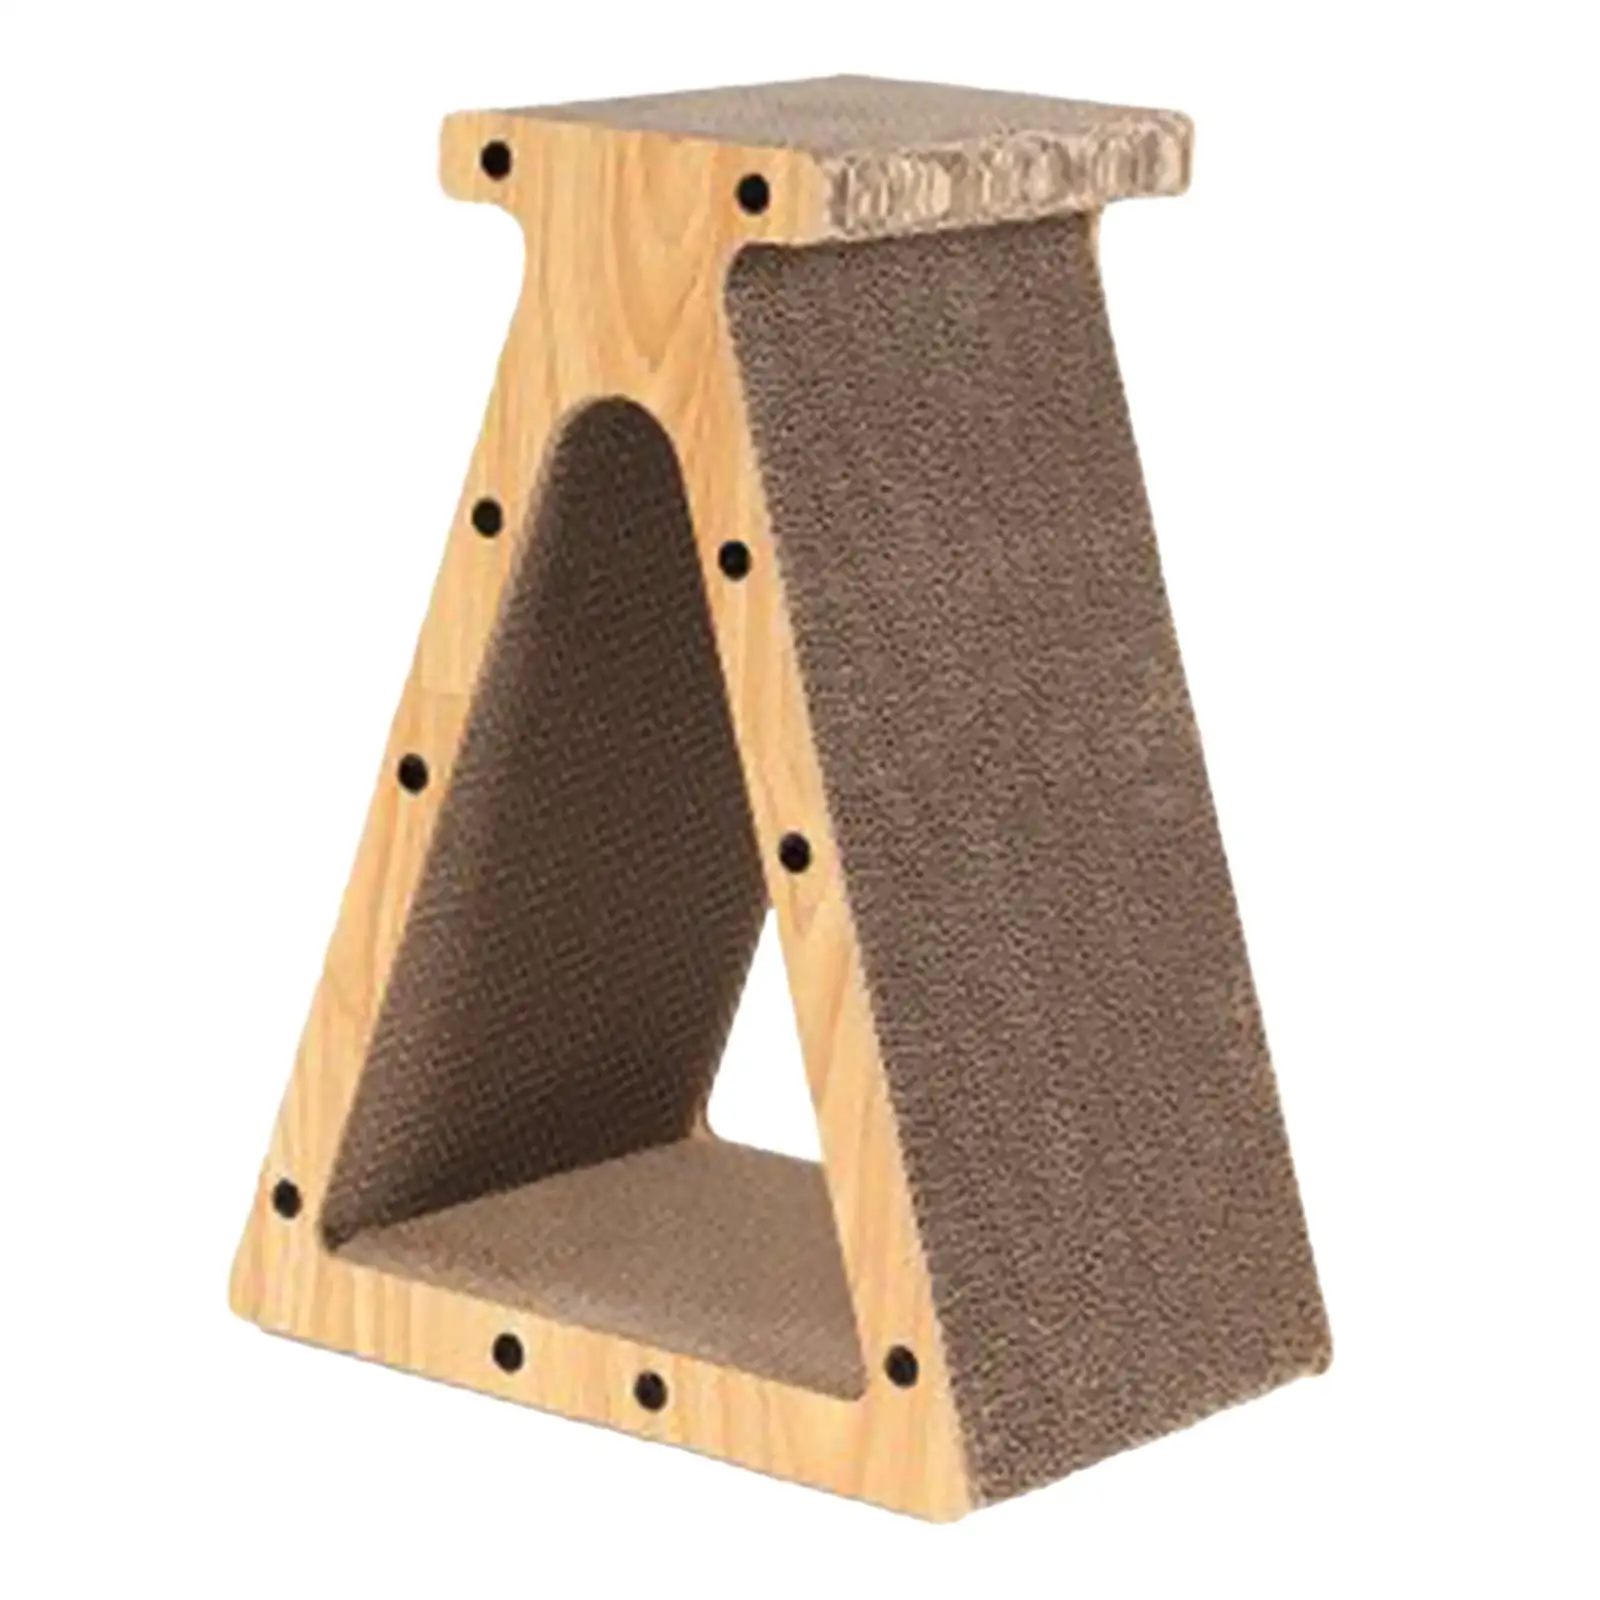 Triangular Corrugated Scratch Pad Scratching Toy Cat Scratcher Cardboard for Sleeping Playing